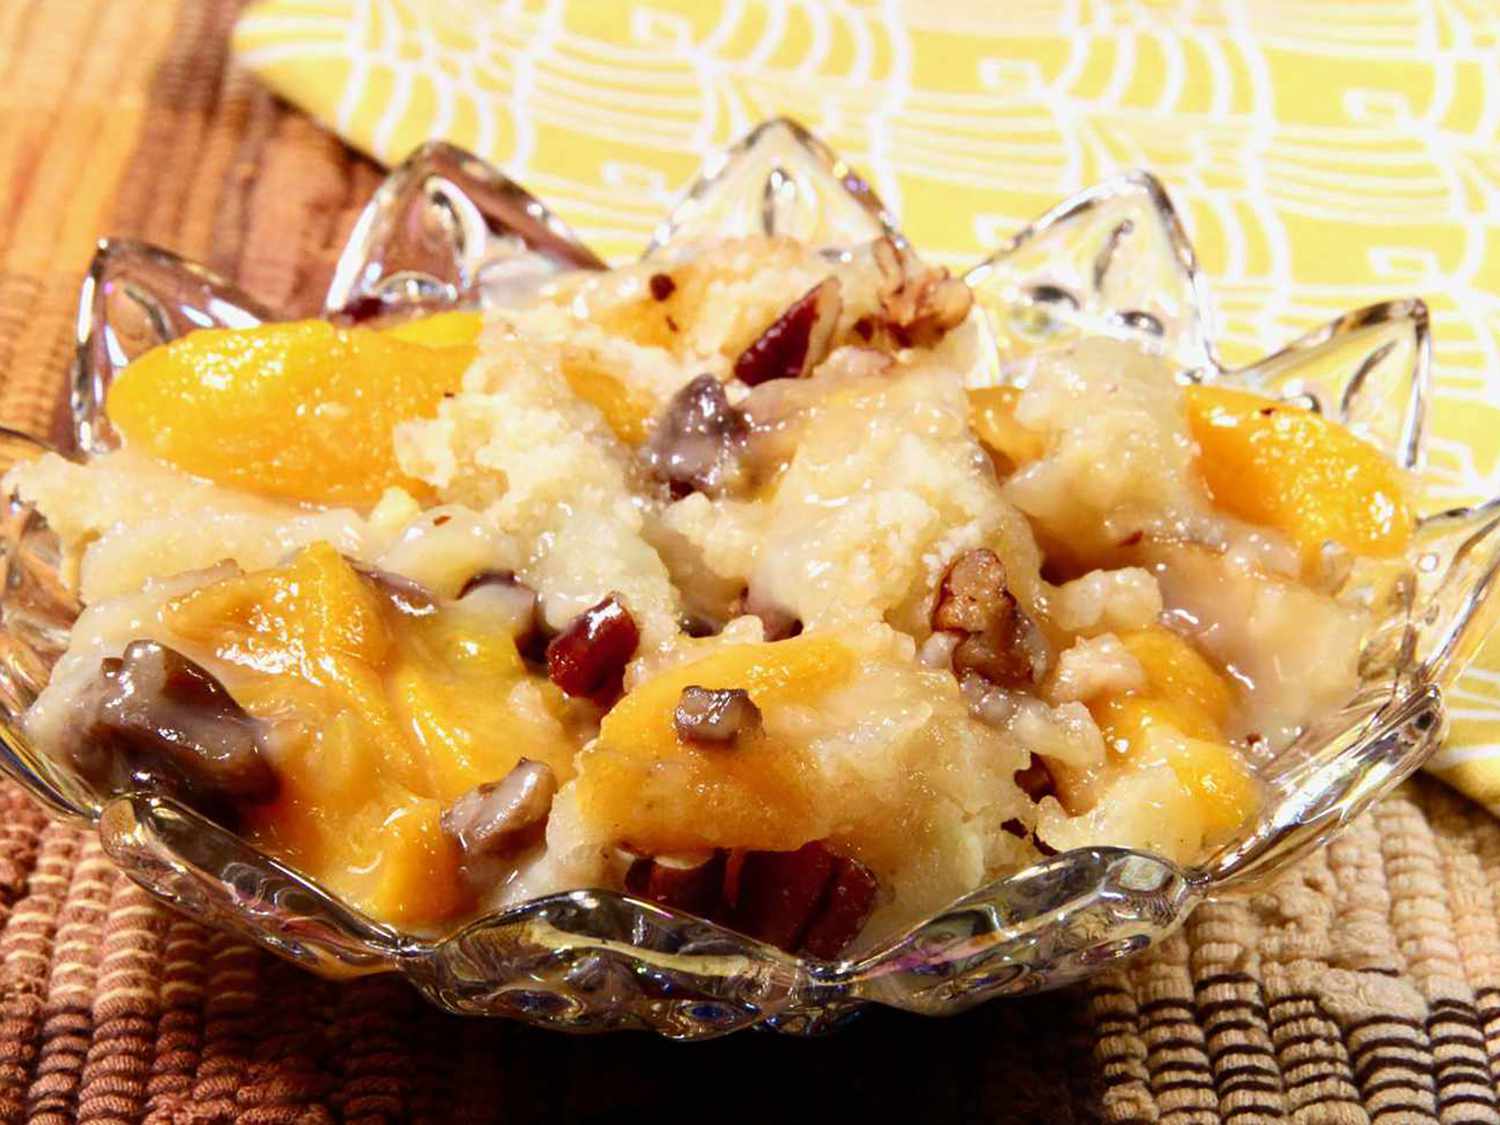 Close up view of Peach Cobbler with Canned Peaches garnished with nuts, in a glass bowl